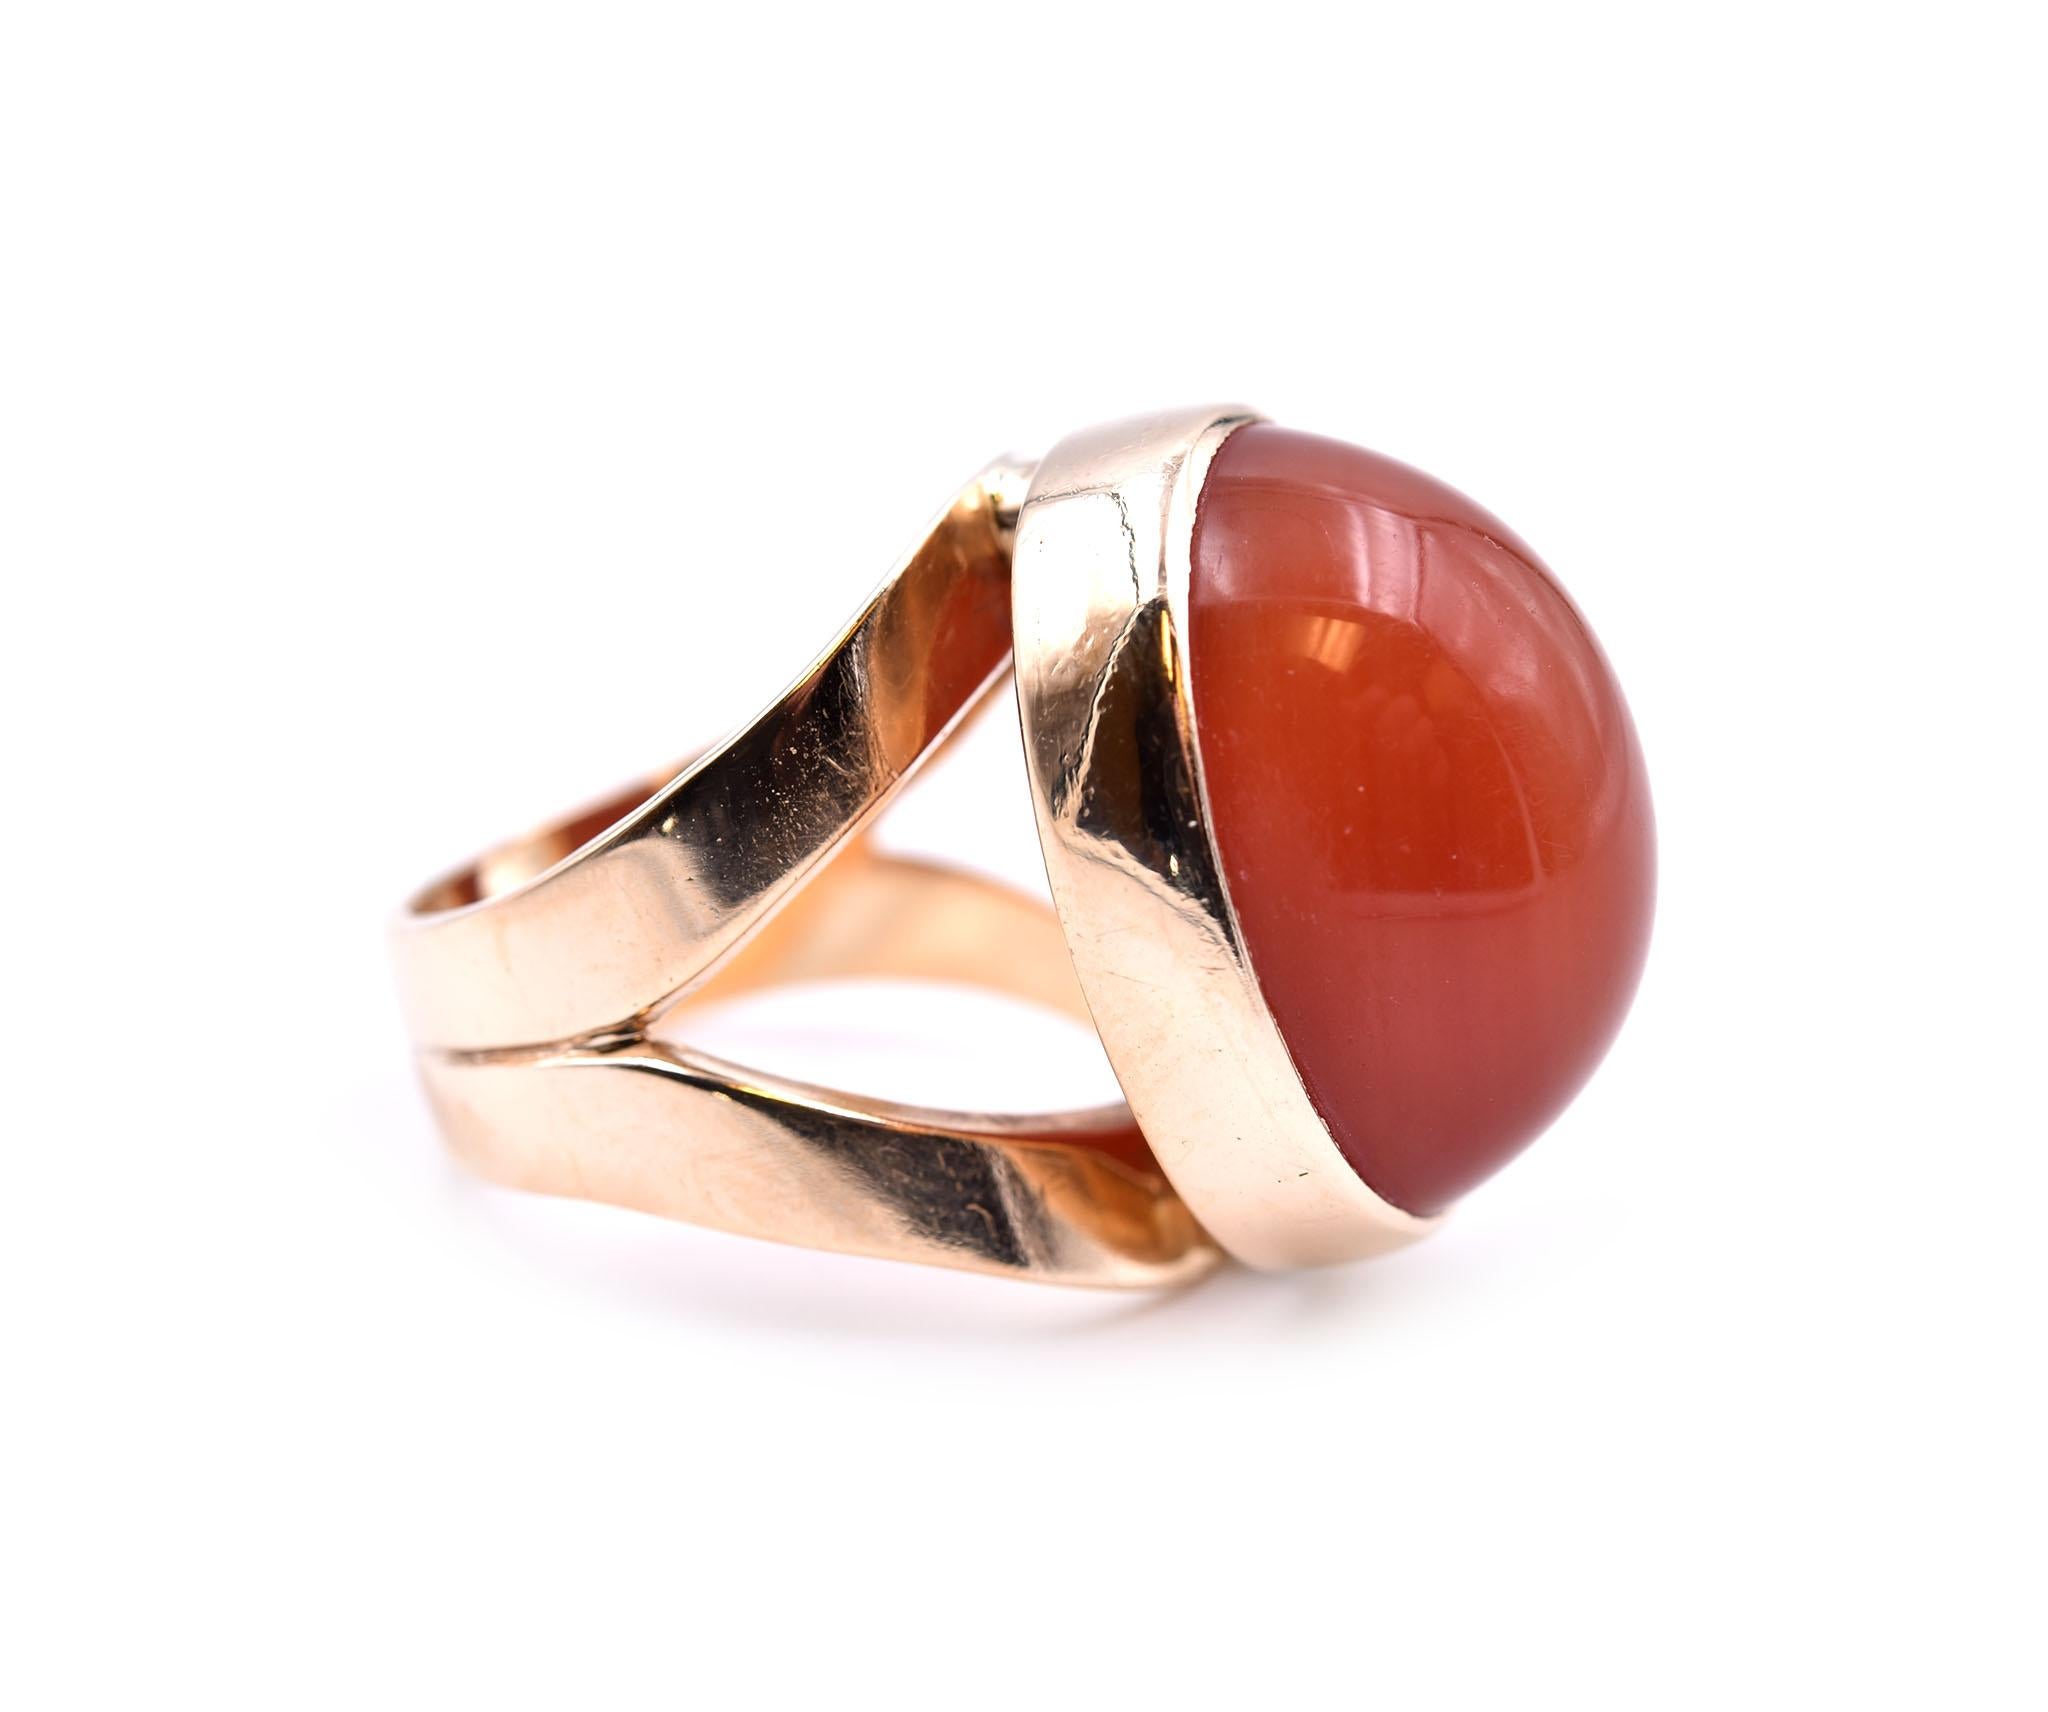 Designer: custom design
Material: 14k yellow gold
Gemstone: cabochon cut carnelian
Dimensions: ring top measures 21.35mm by 16.30mm
Ring size: 6.5 (please allow two additional shipping days for sizing requests) 
Weight: 12.79 grams 